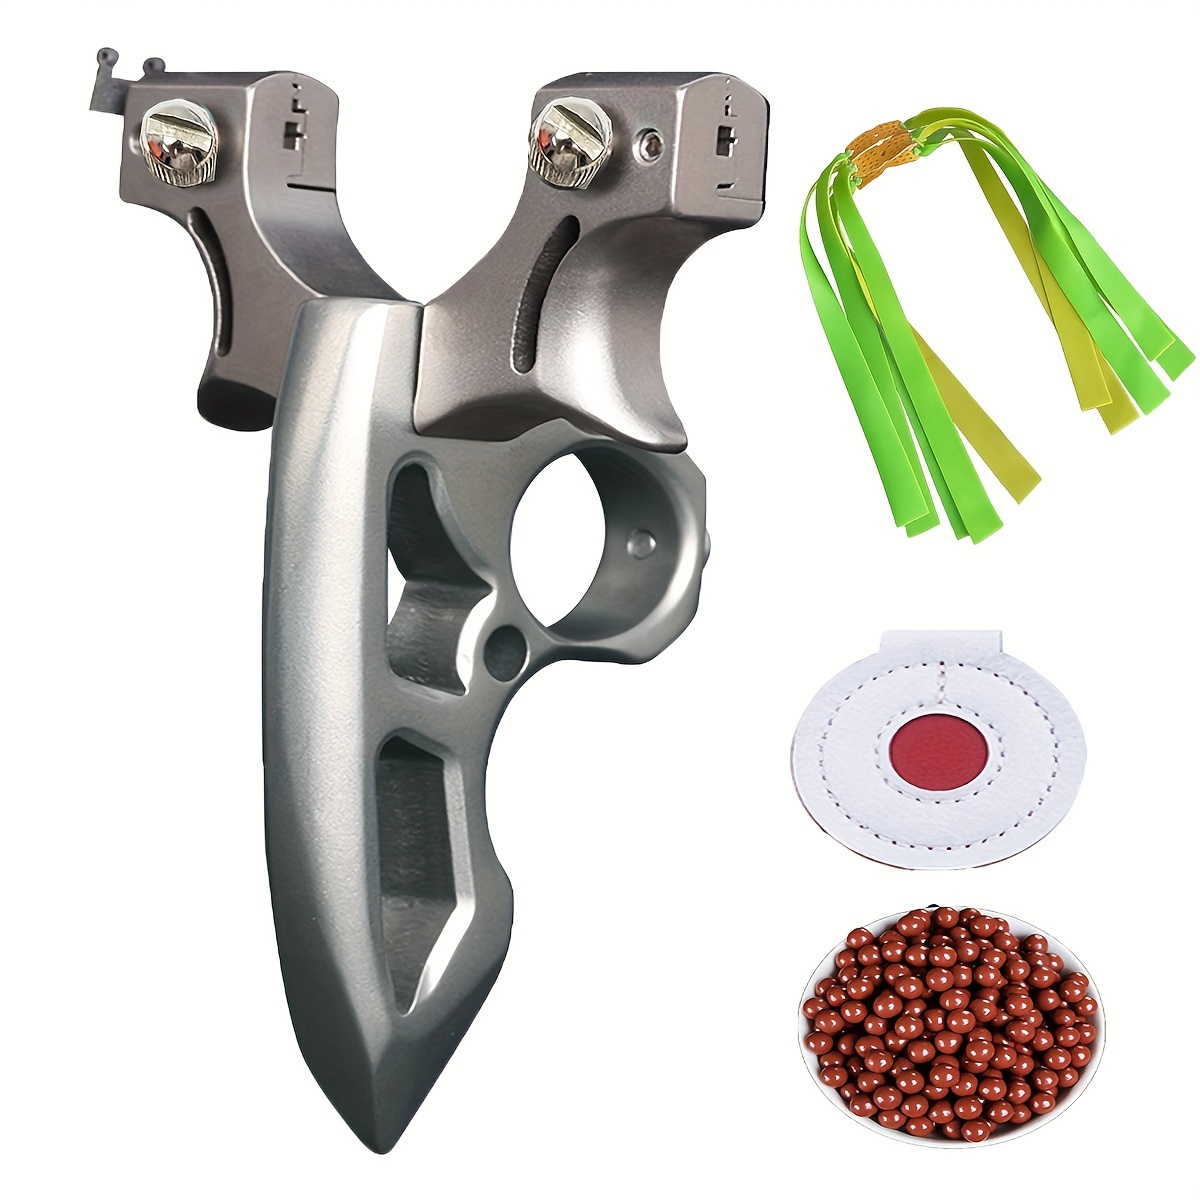 Powerful catapult Hunting Slingshot Rifle Safe Stainless Steel